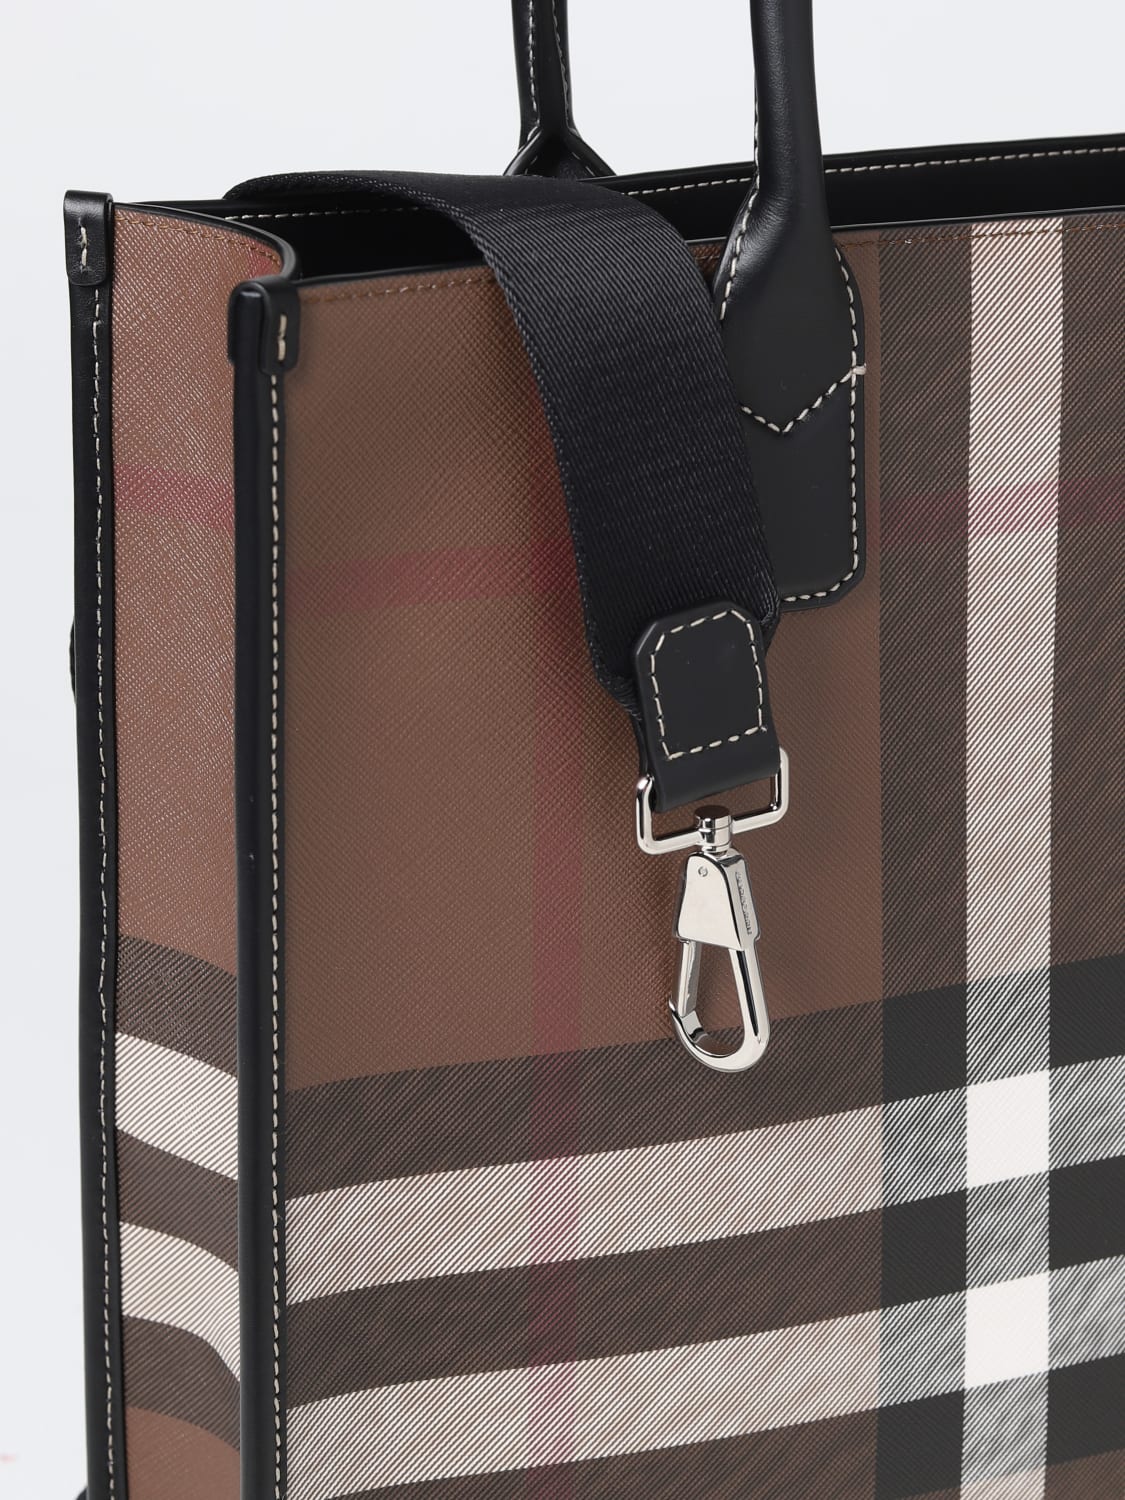 Burberry Medium Canvas Check Tote Bag in Brown